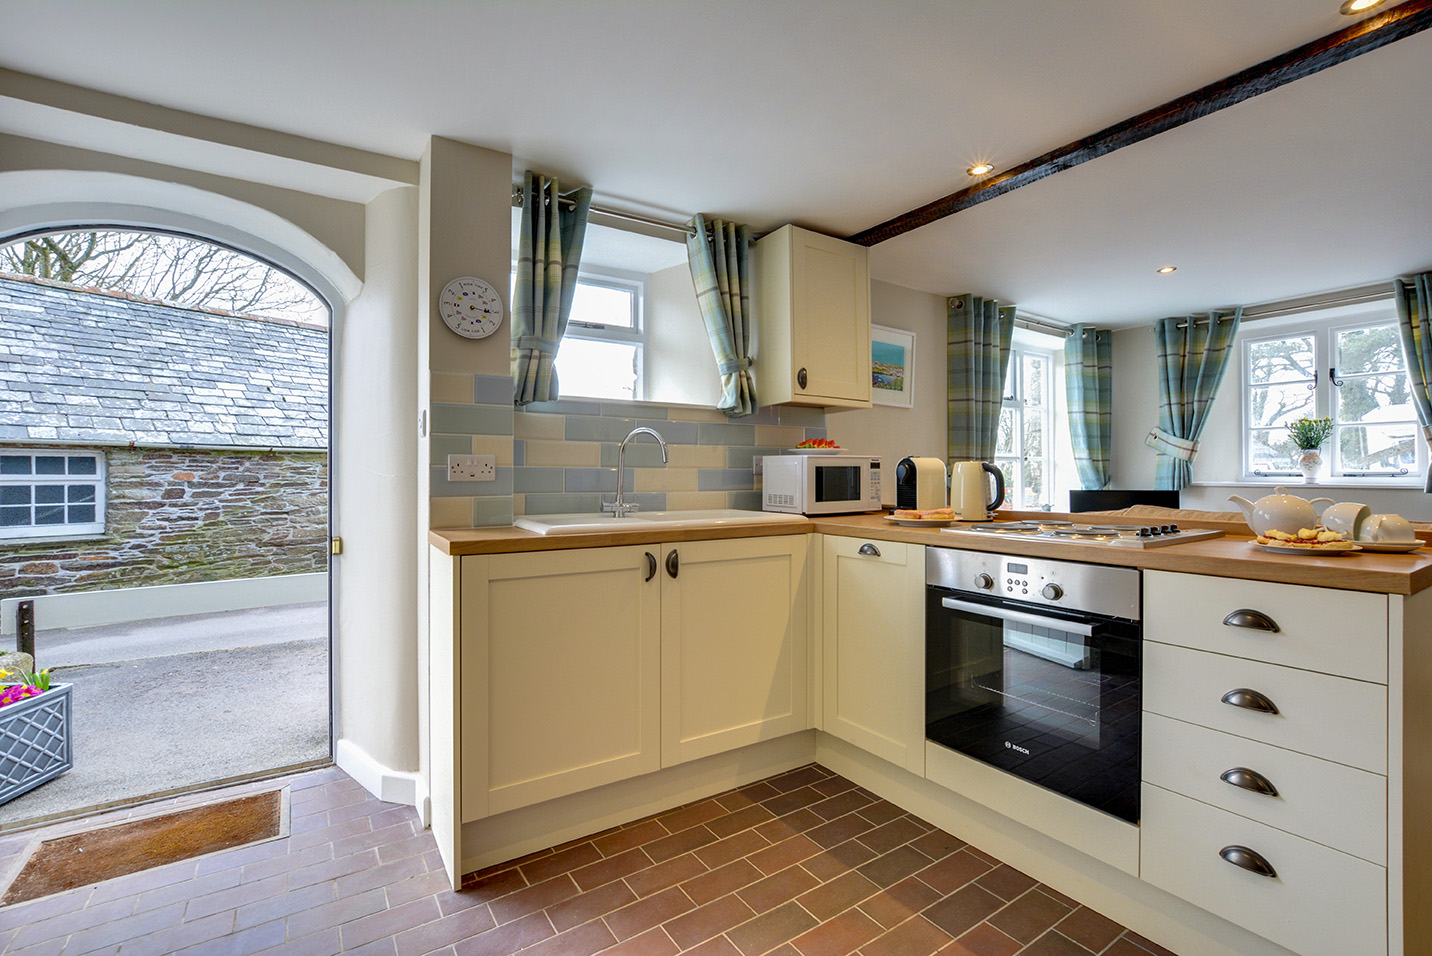 The kitchen of Butterwell luxury self catering converted barn holiday cottage at Penrose Burden in North Cornwall 01.jpg